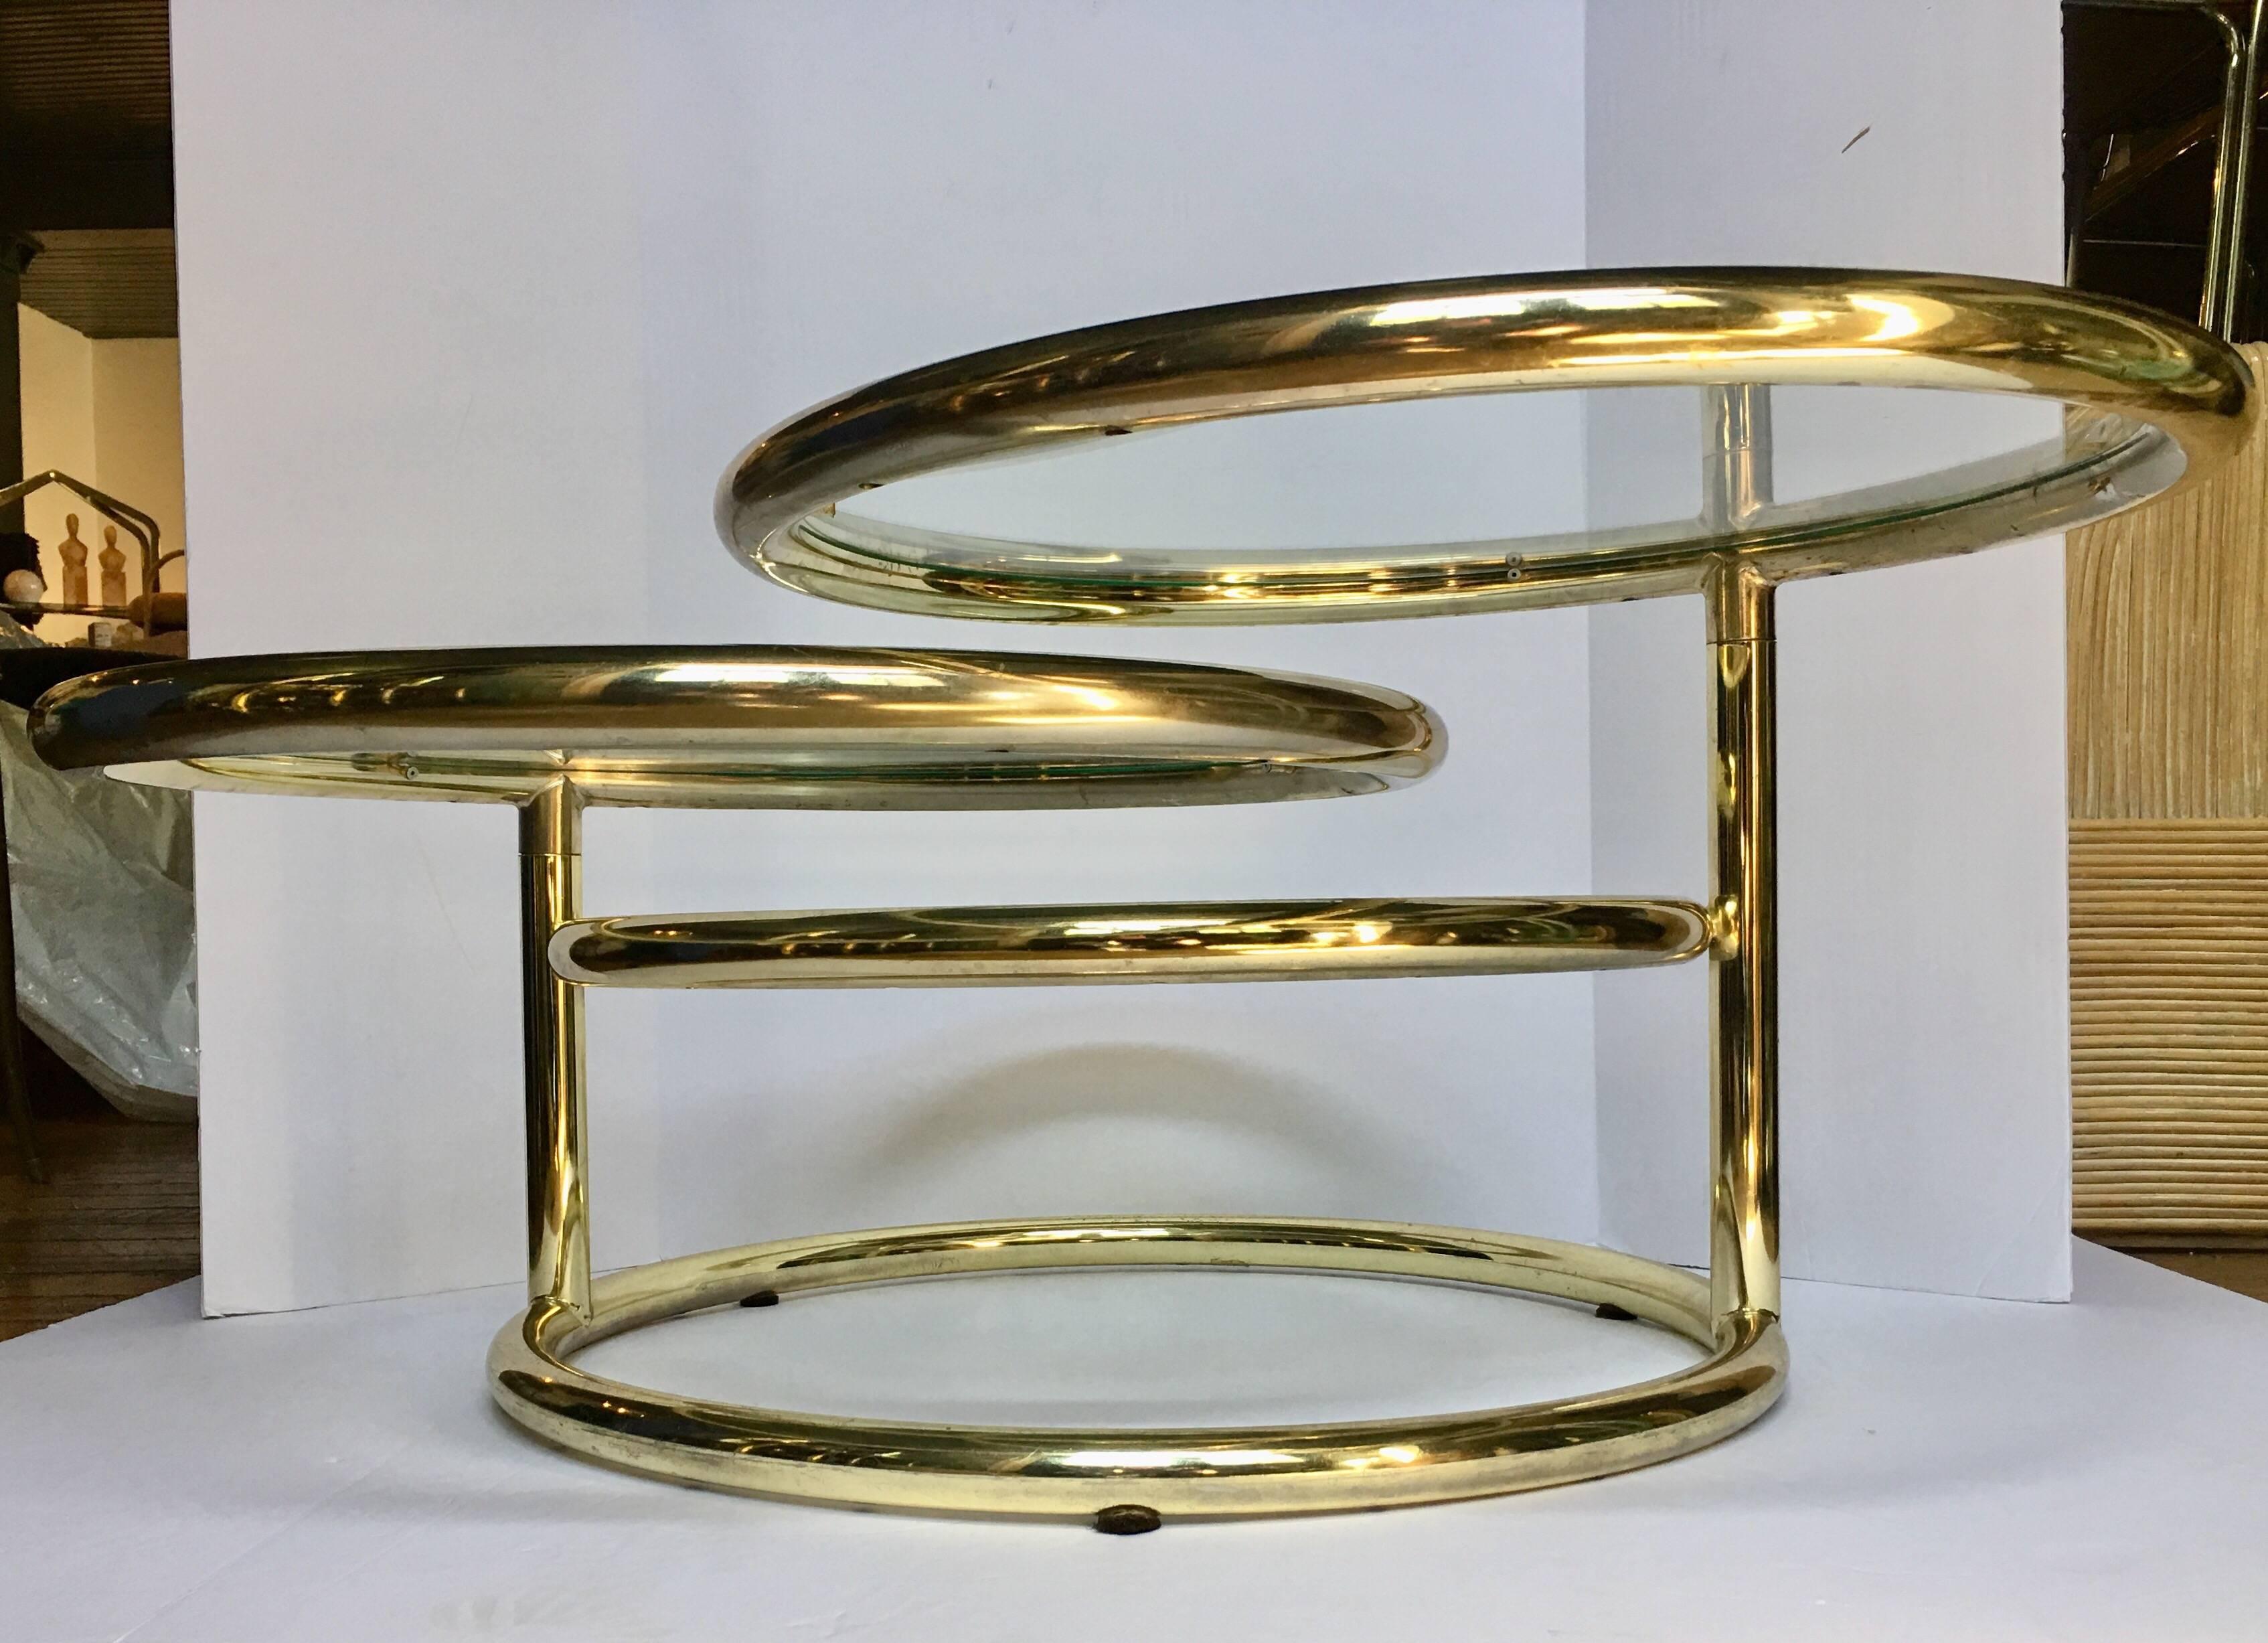 Modern three-tier brass plated swivel cocktail table featuring a tubular frame with removable clear glass inserts. Top and second tier swivel. Table measures 66 inches long when both tiers are fully extended. Third tier is stationary.  In the style